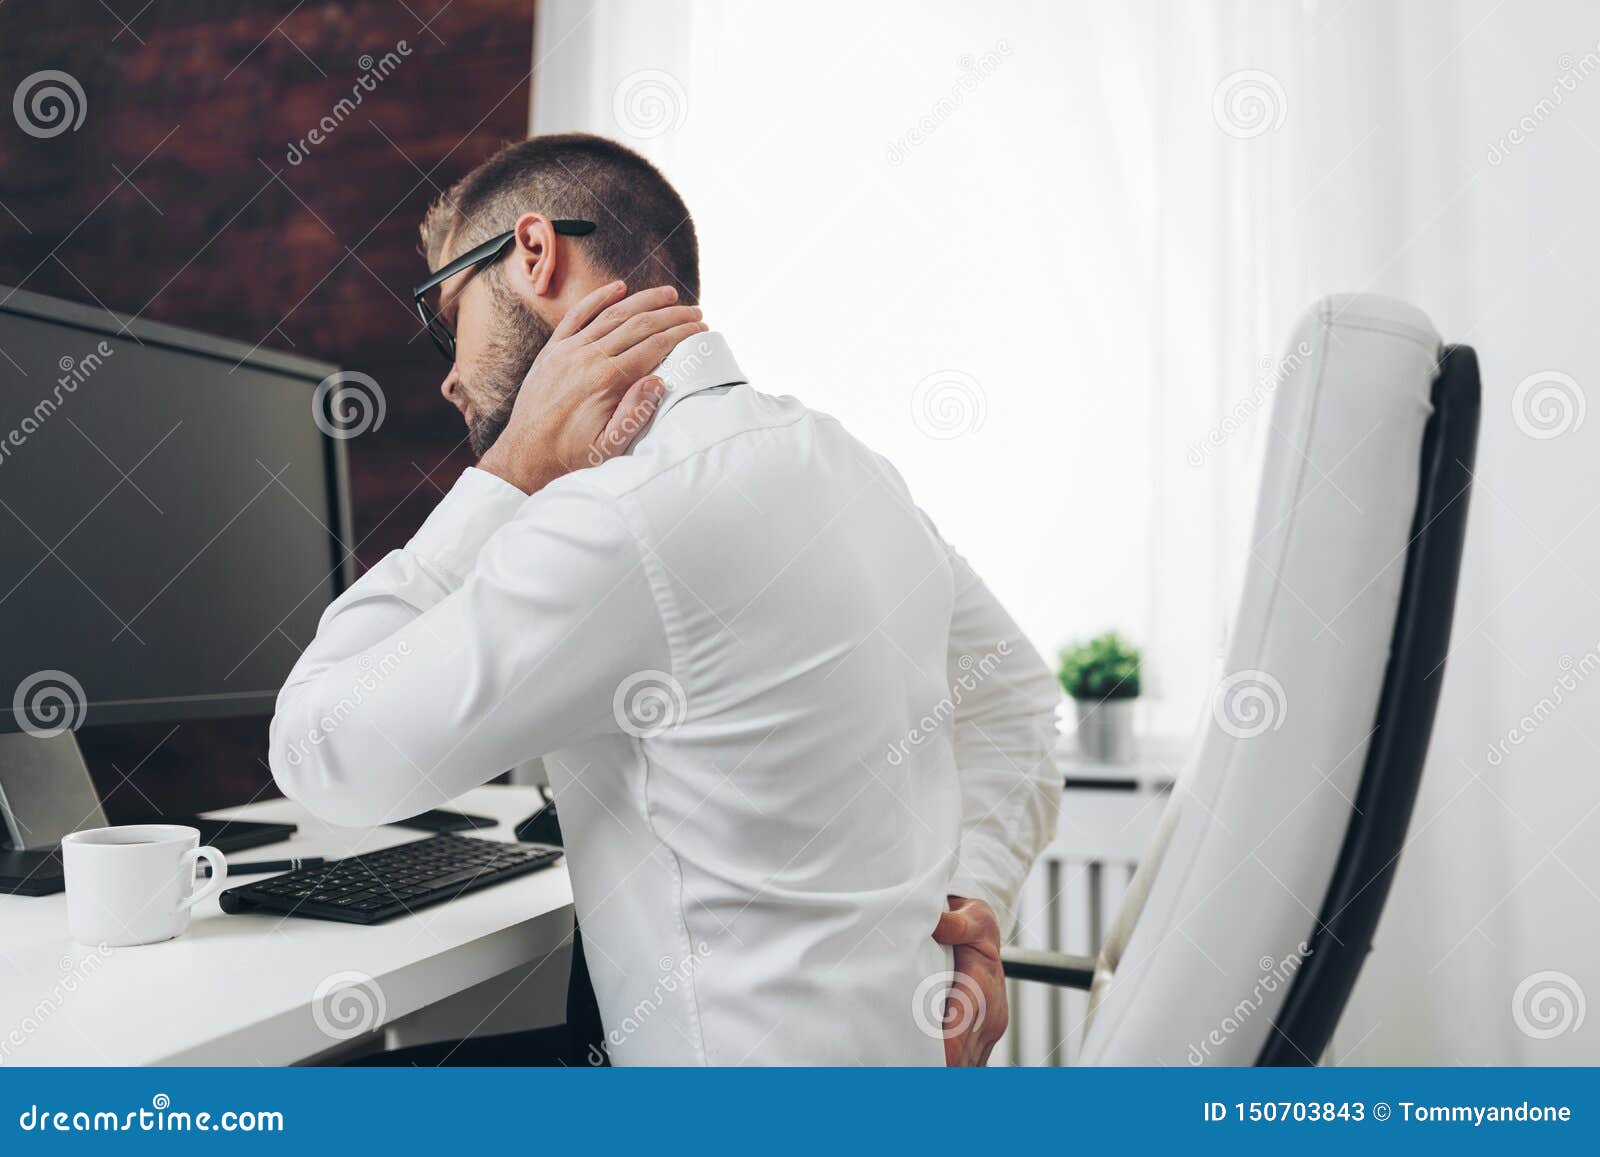 Office Worker With Pain From Sitting At Desk All Day Stock Image